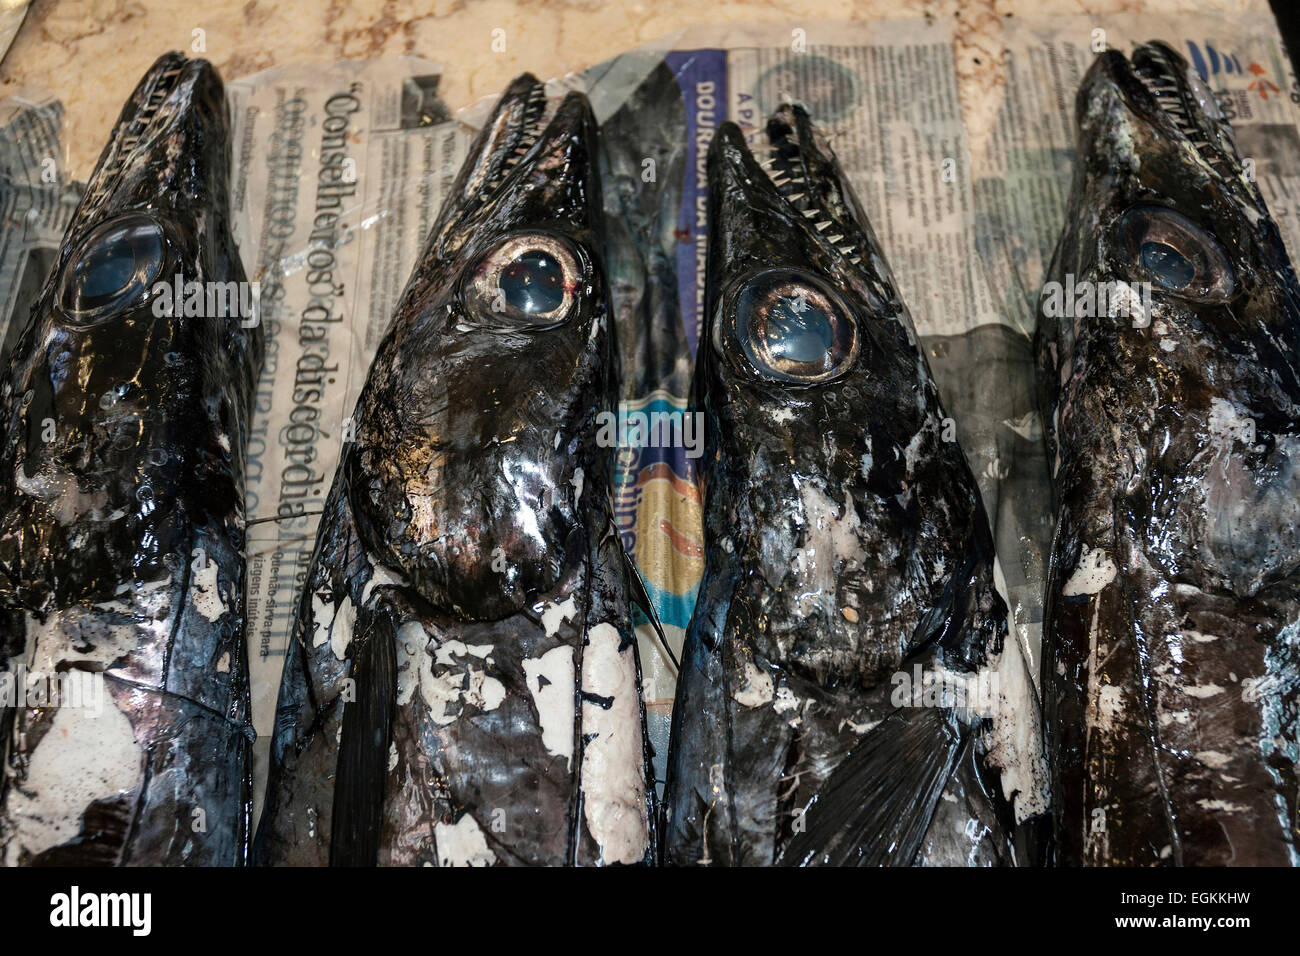 Black scabbard fish (Aphanopus carbo), Fish Market, Funchal, Madeira, Portugal Stock Photo